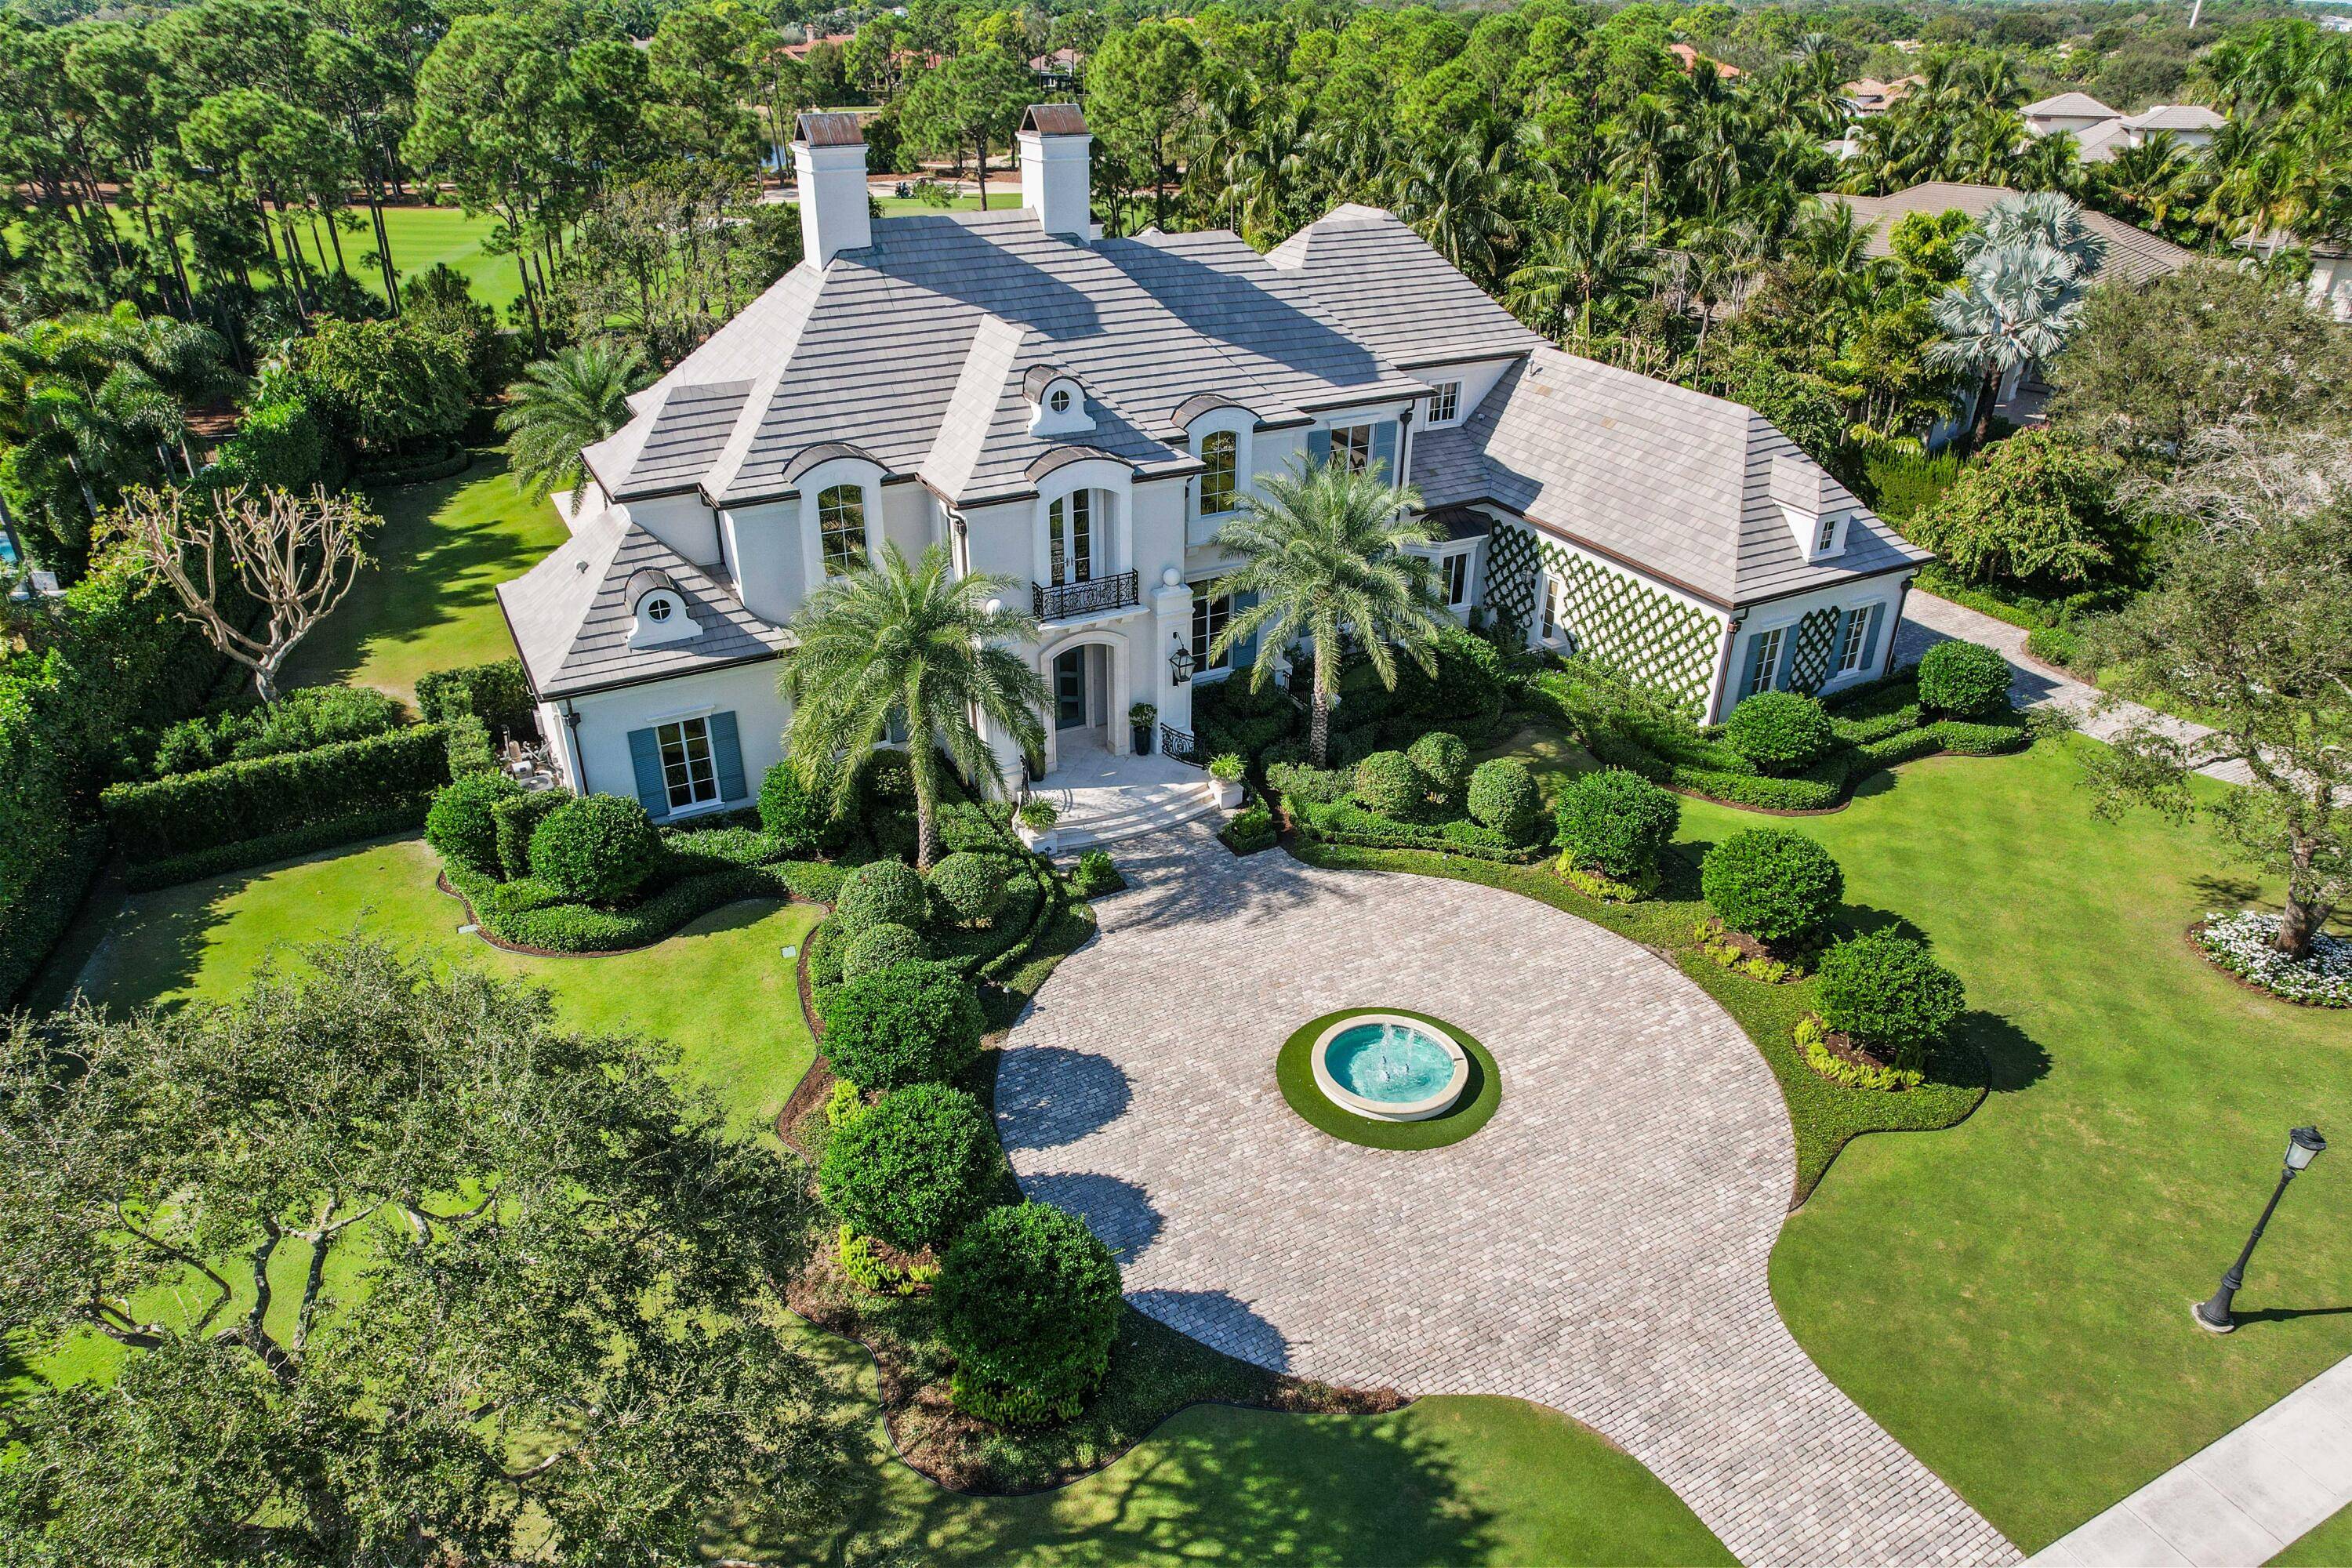 This stunning home, nestled on a 1 acre plot within the prestigious Old Palm Golf Club, emanates European elegance.